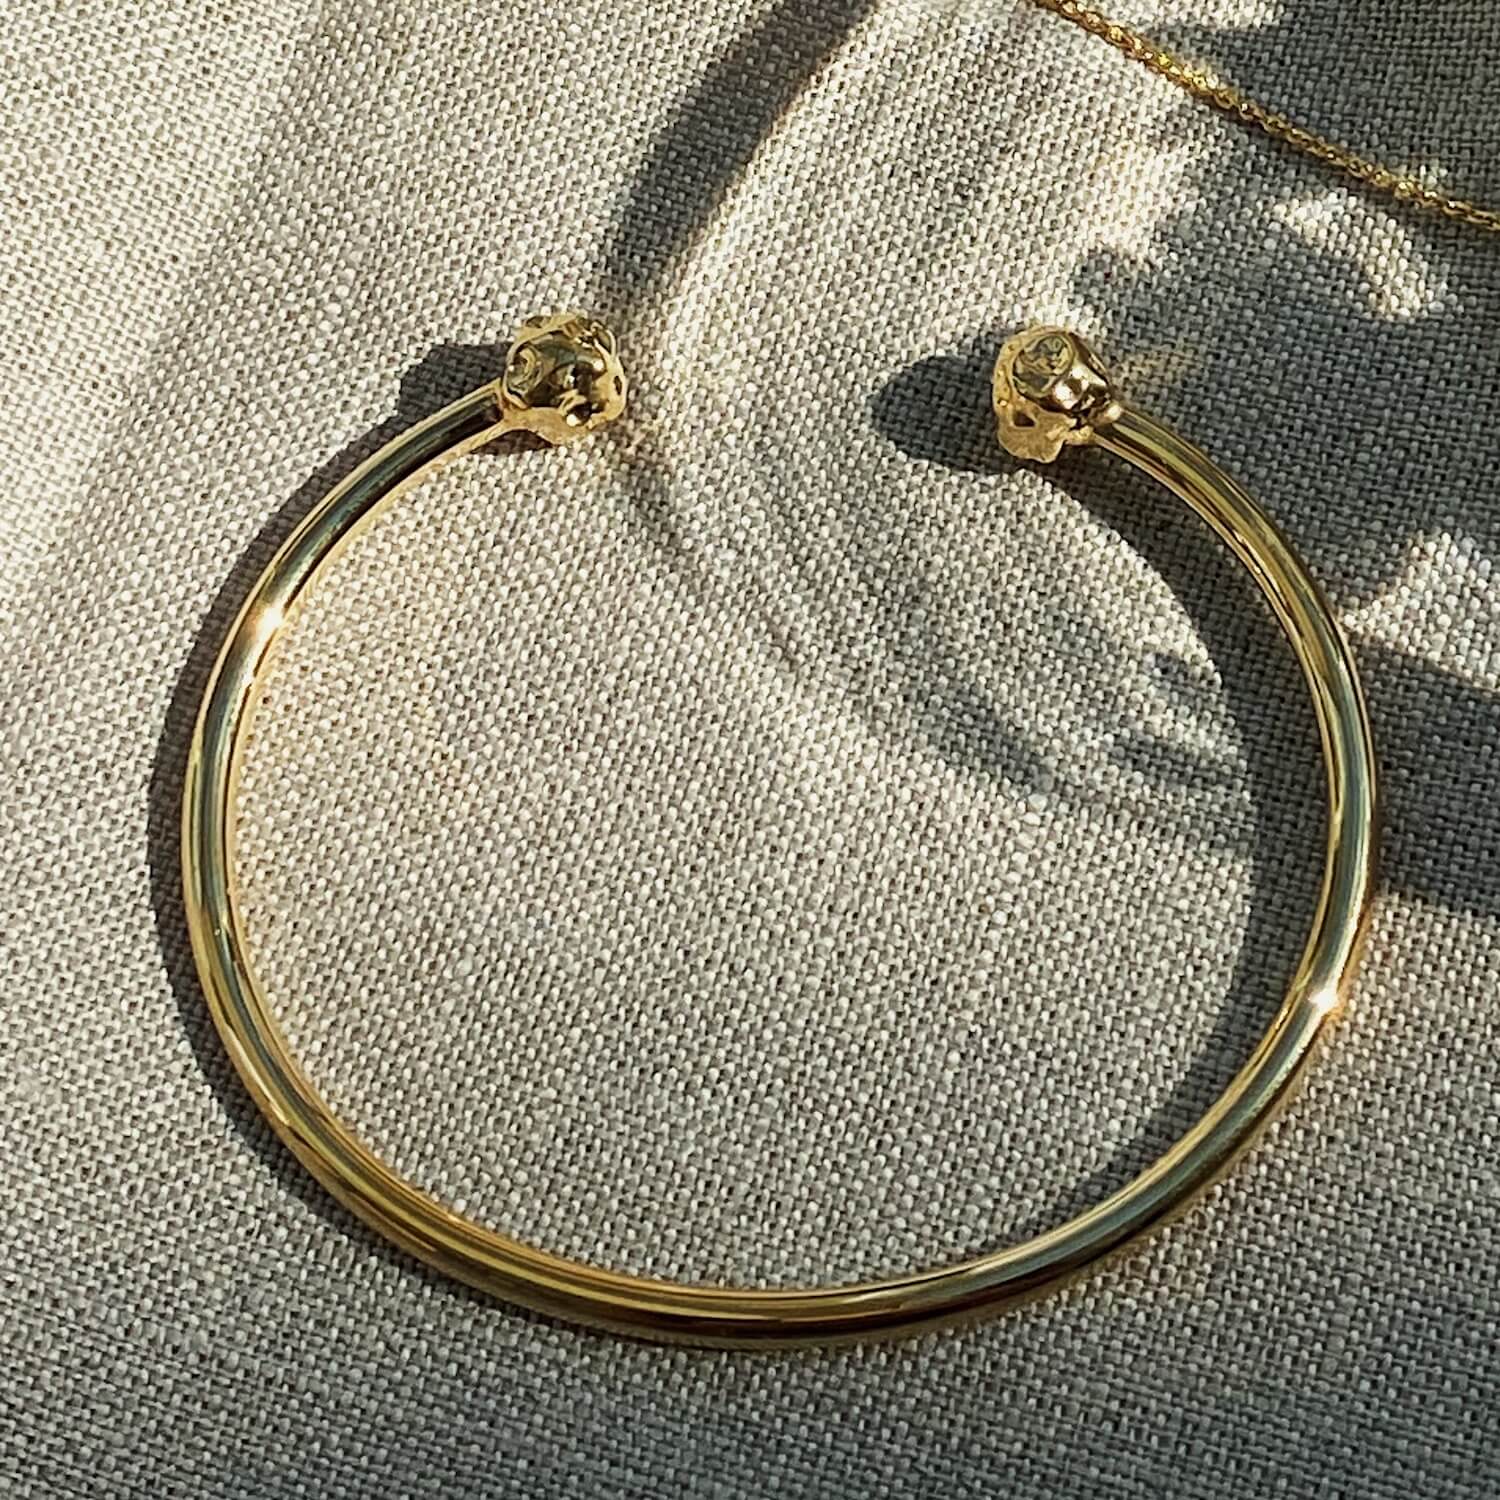 Close up of gold open bangle with textured charms